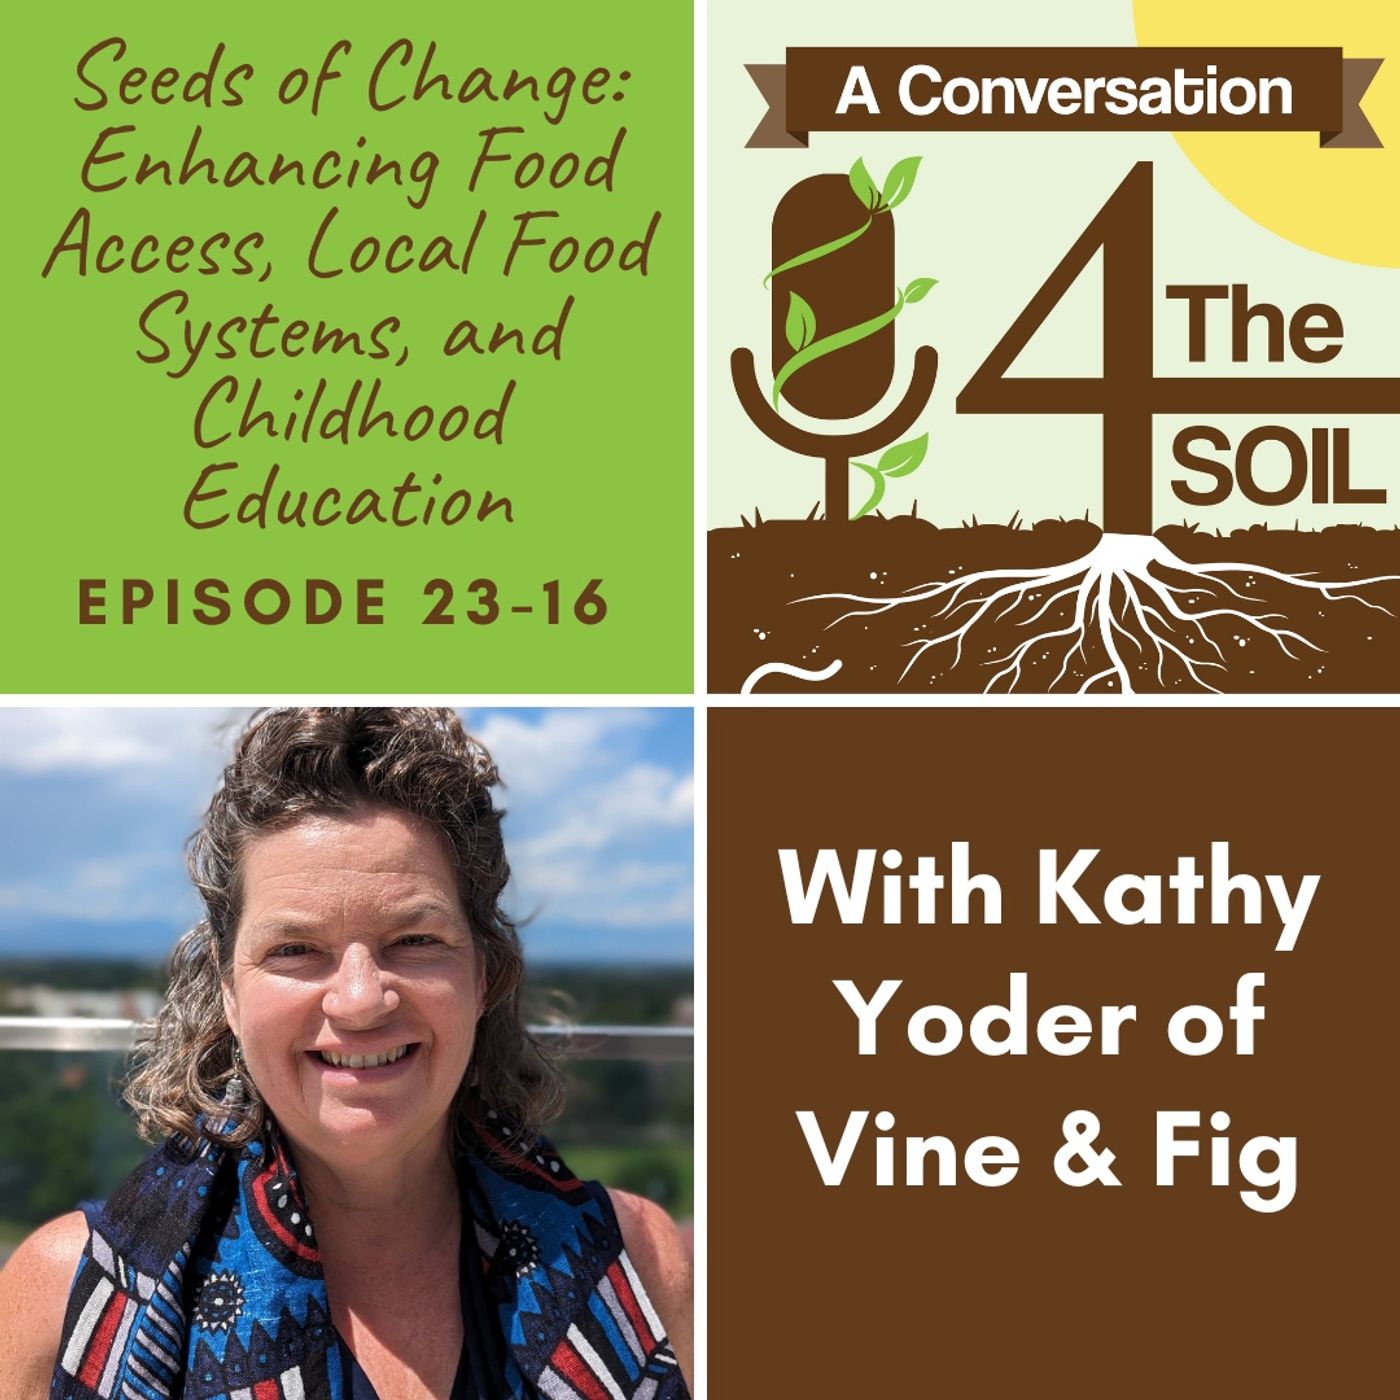 Episode 23-16: Seeds of Change: Enhancing Food Access, Local Food Systems, and Childhood Education with Kathy Yoder of Vine and Fig